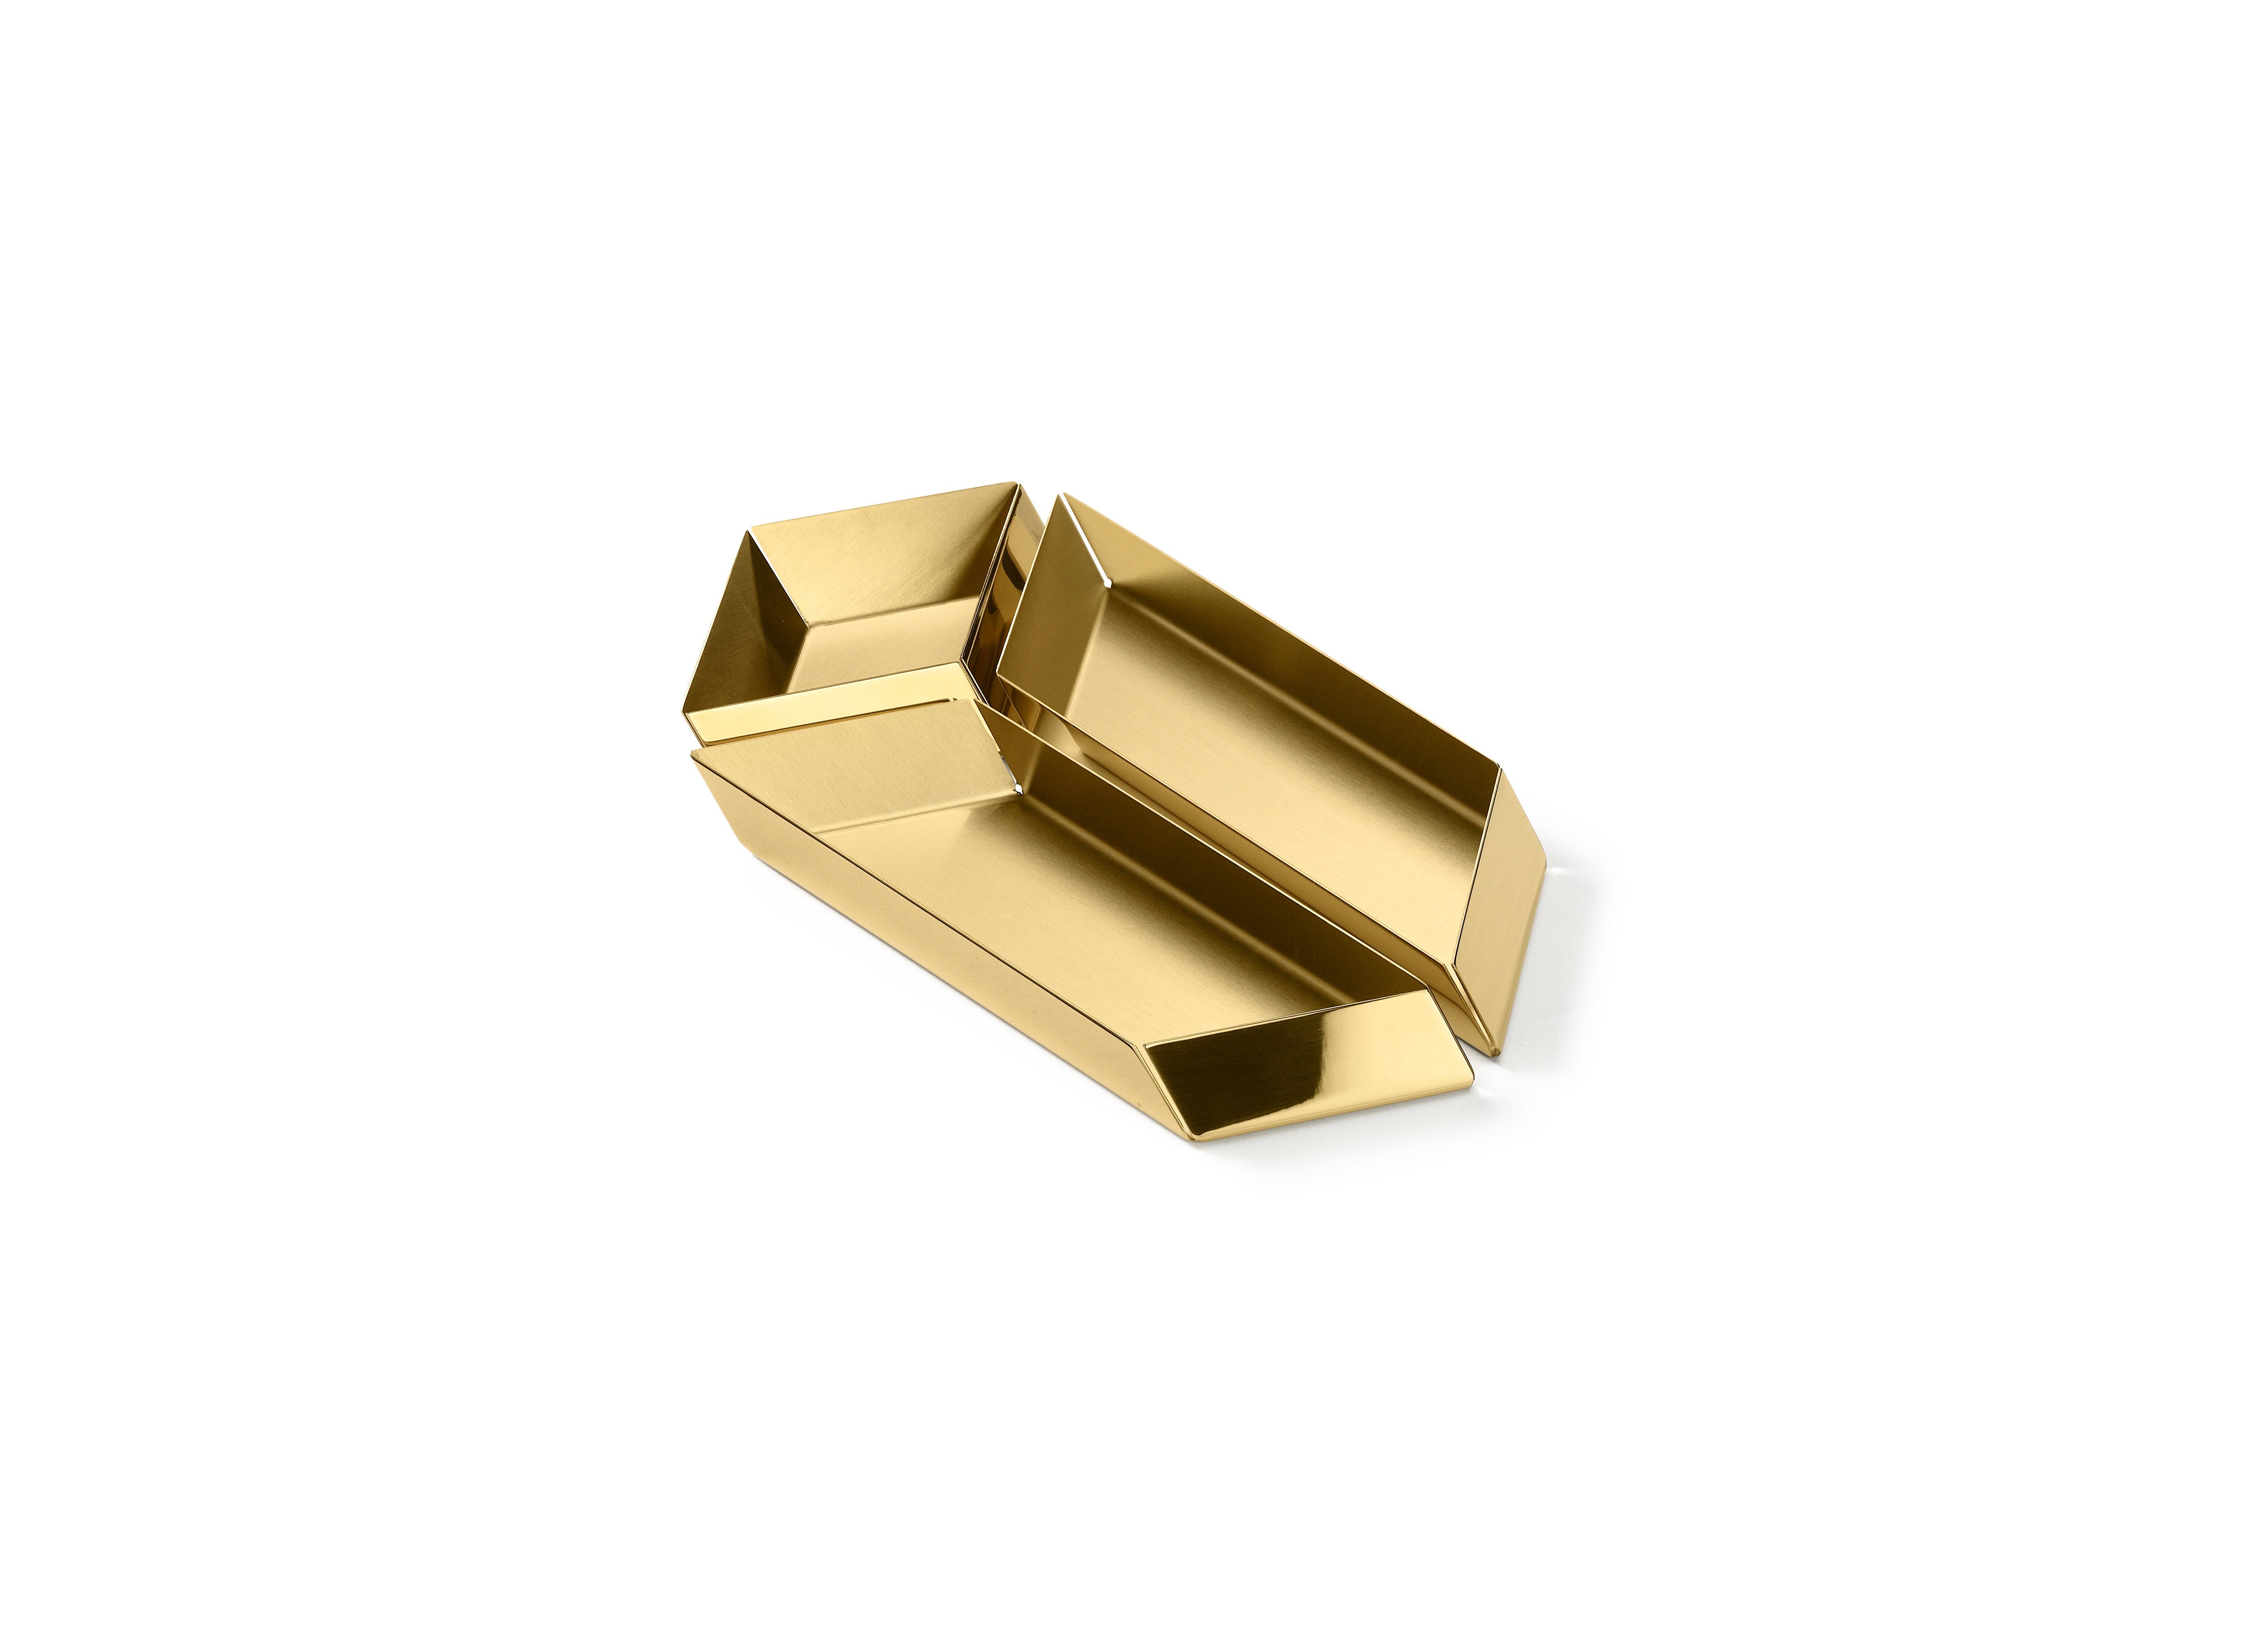 The compositional scheme of this family of small trays is the axonometric isometric projection of two parallelepipeds which creates a three-dimensional optical effect implemented by inclined edges and by contrasting metal finishes. Like in a game,